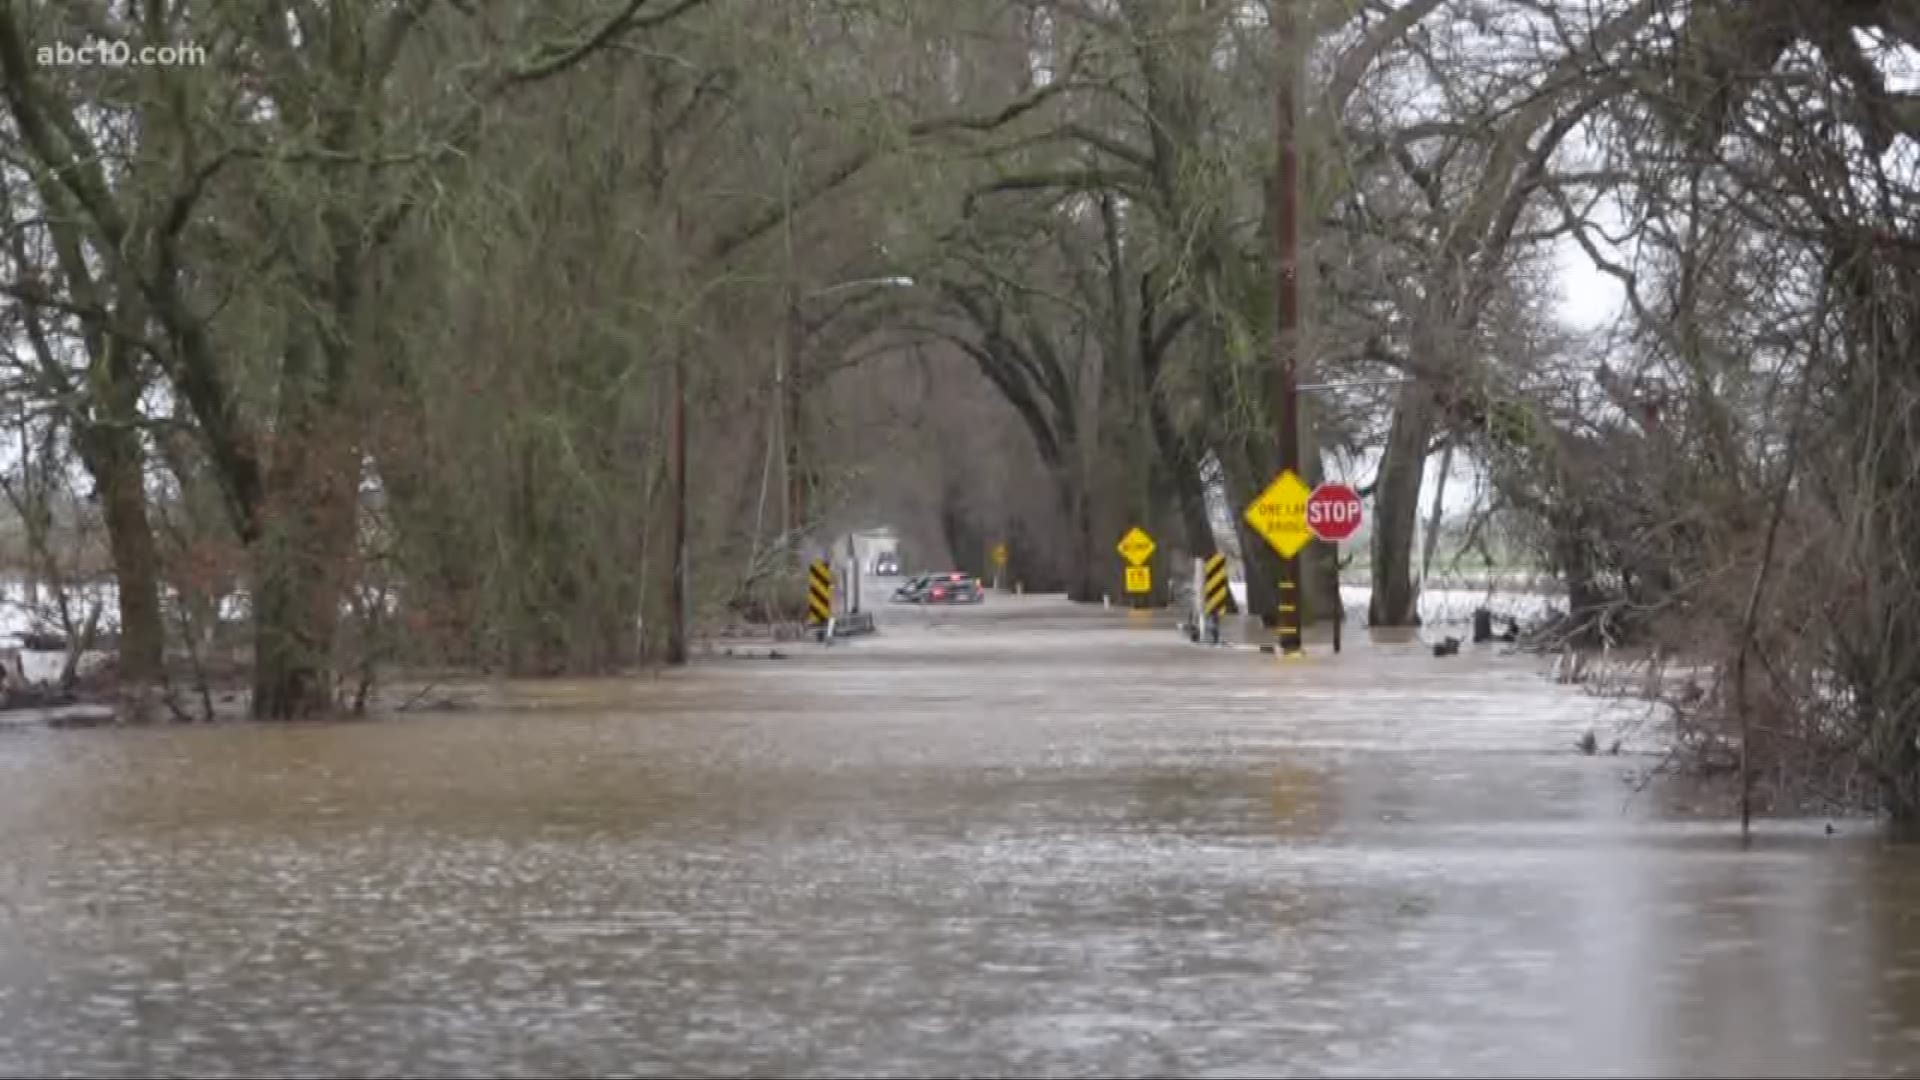 "The flooding is very frustrating," said Kimmy Palmer. "The road was so flooded. The water was running so quickly across the road that we just turned around."